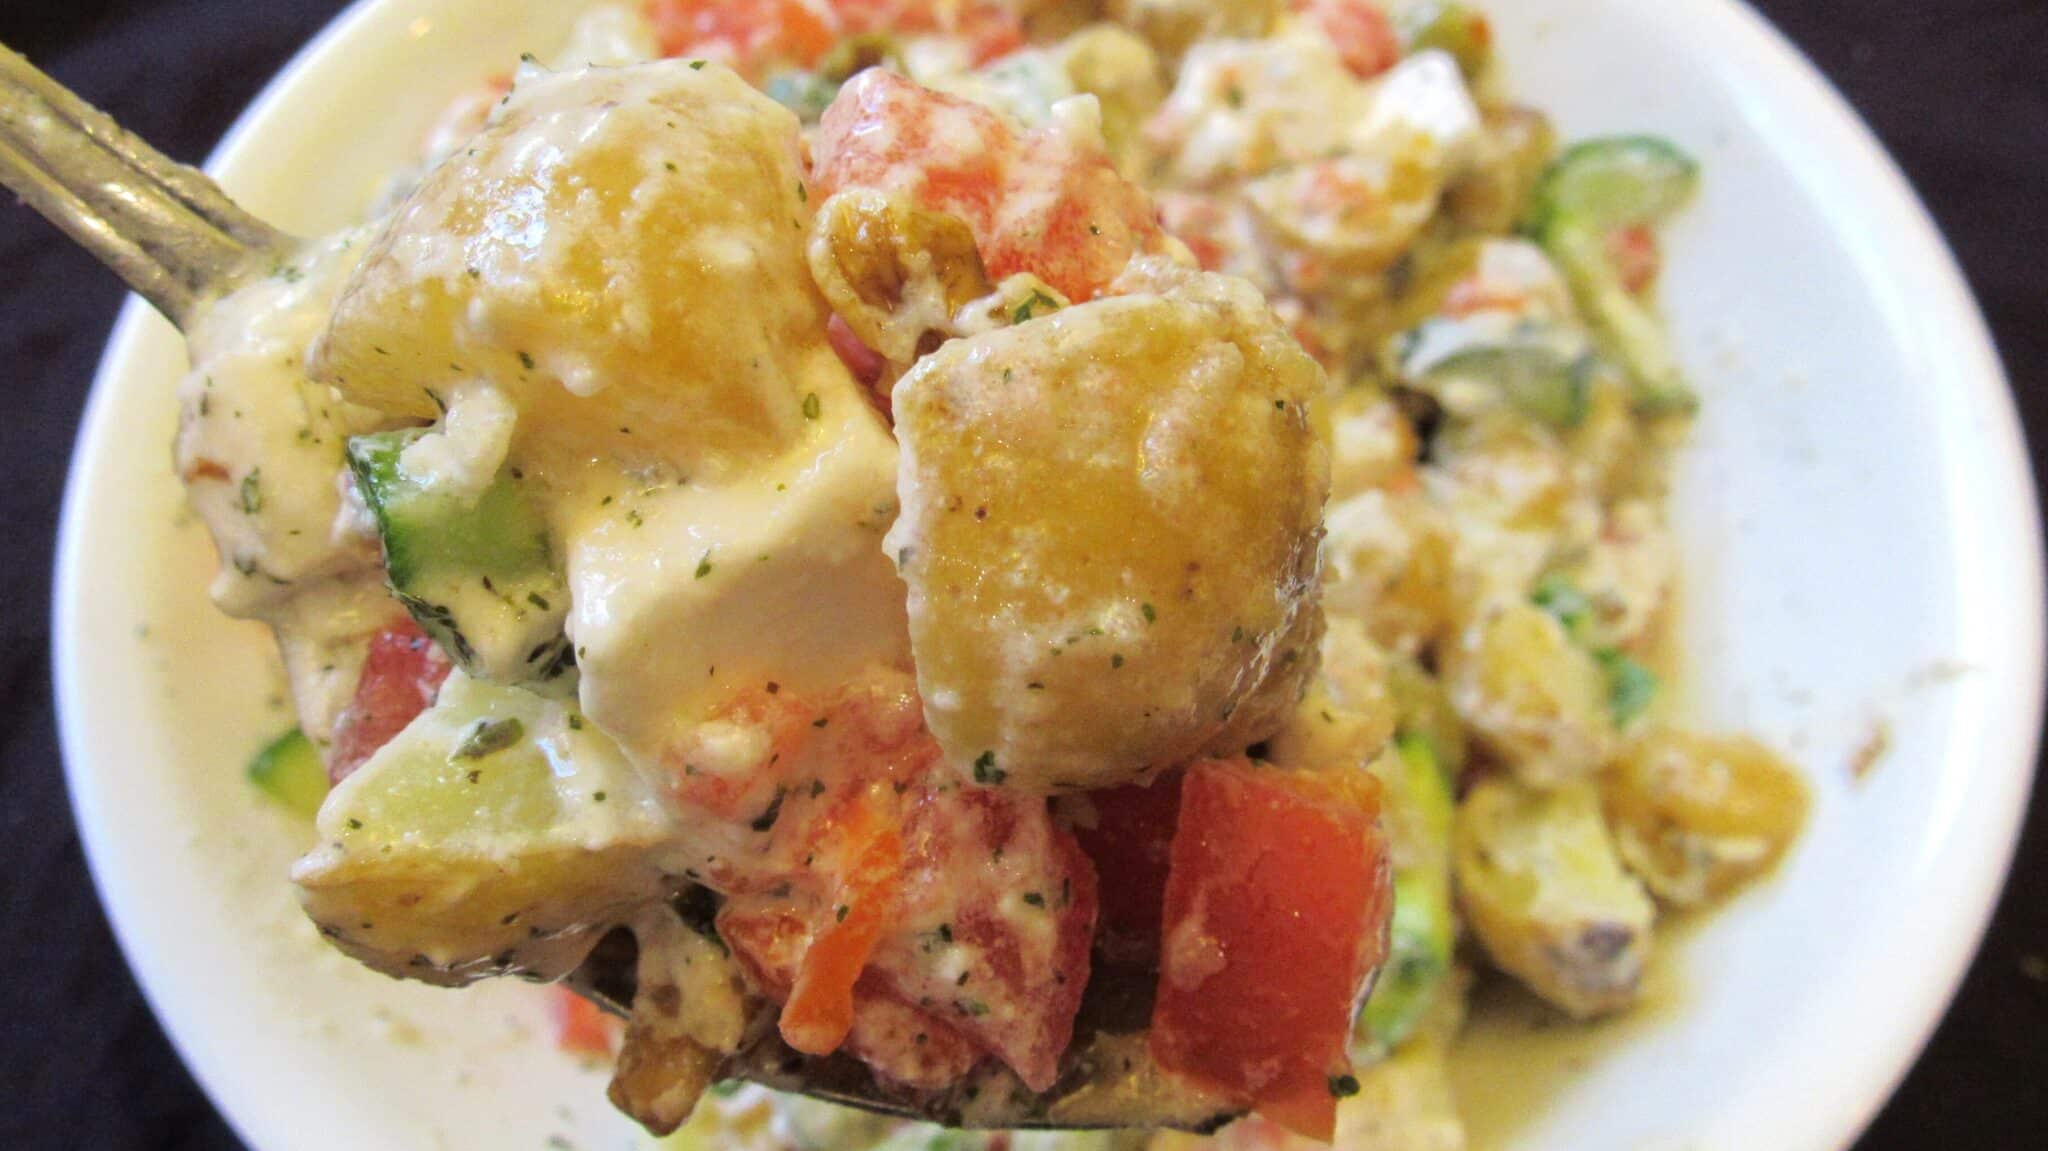 Easy potato salad without egg is served.